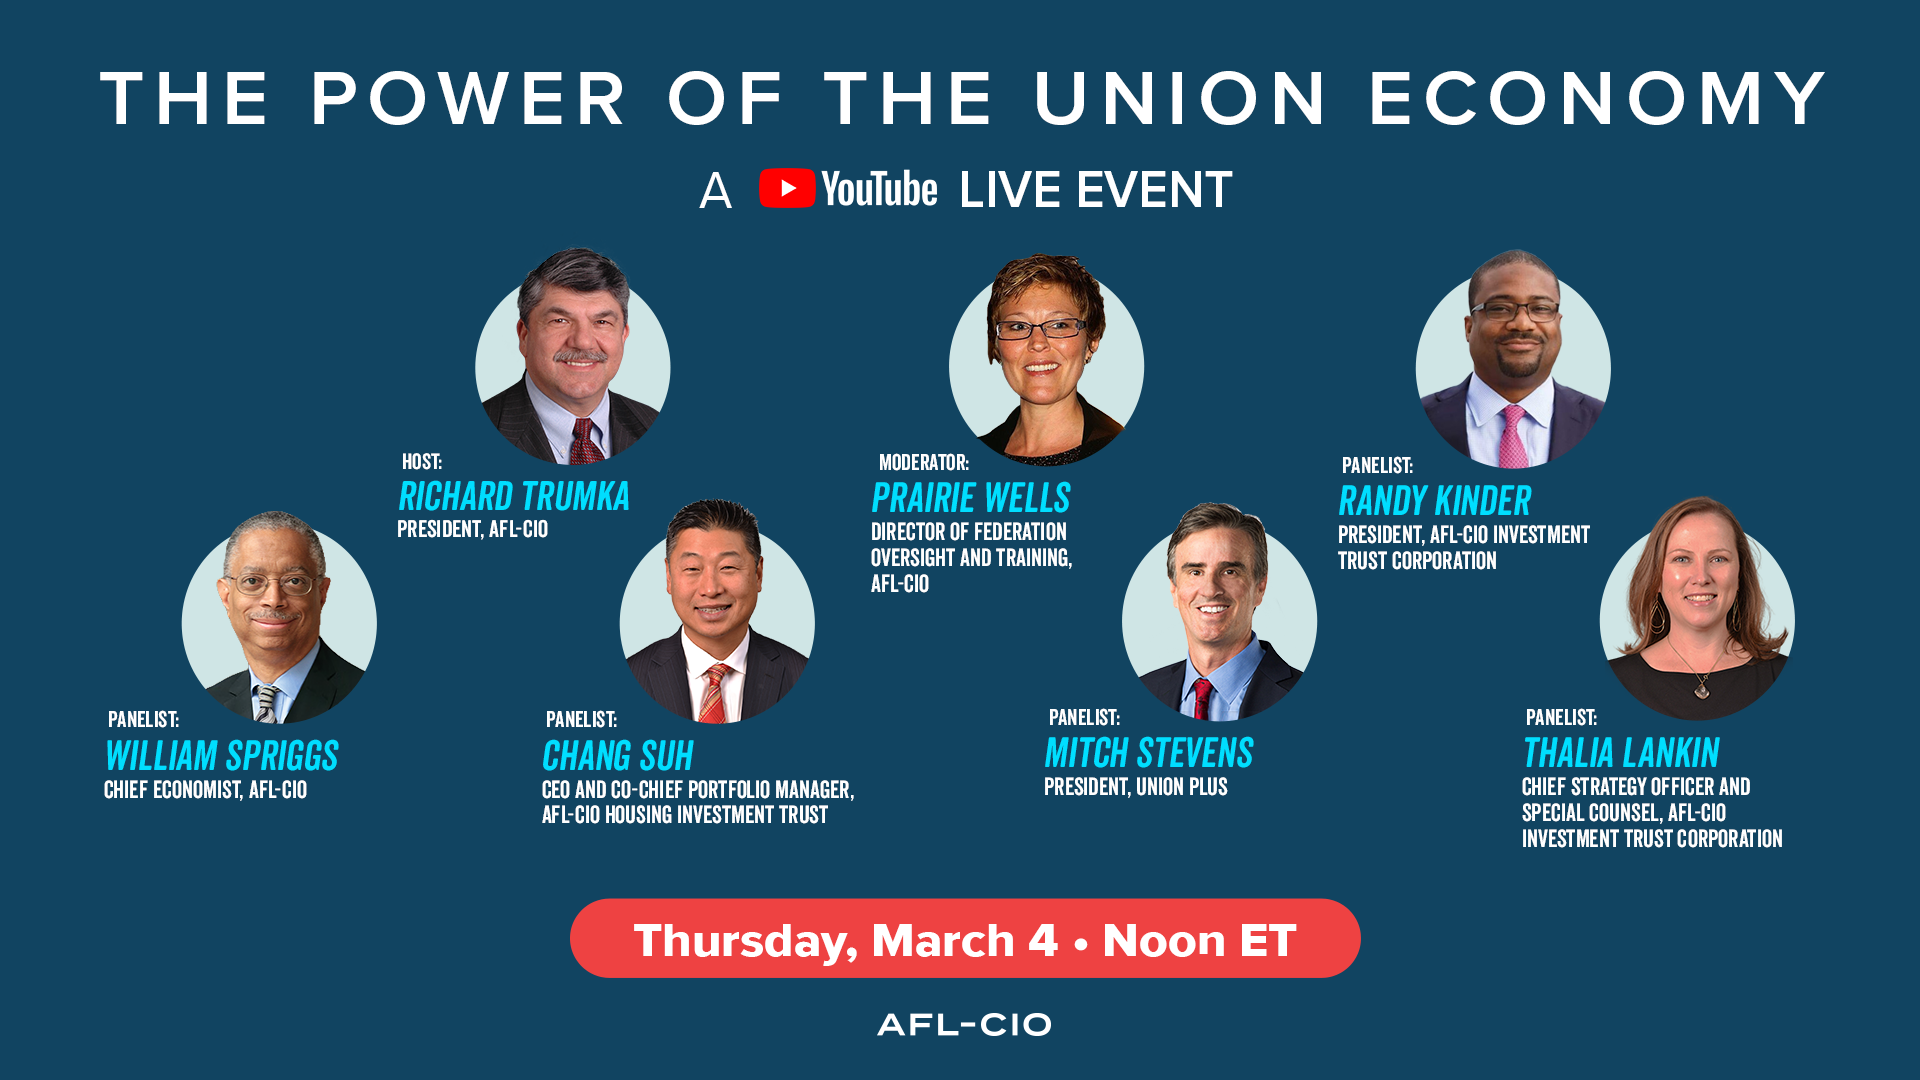 The Power of the Union Economy: A YouTube Live Event